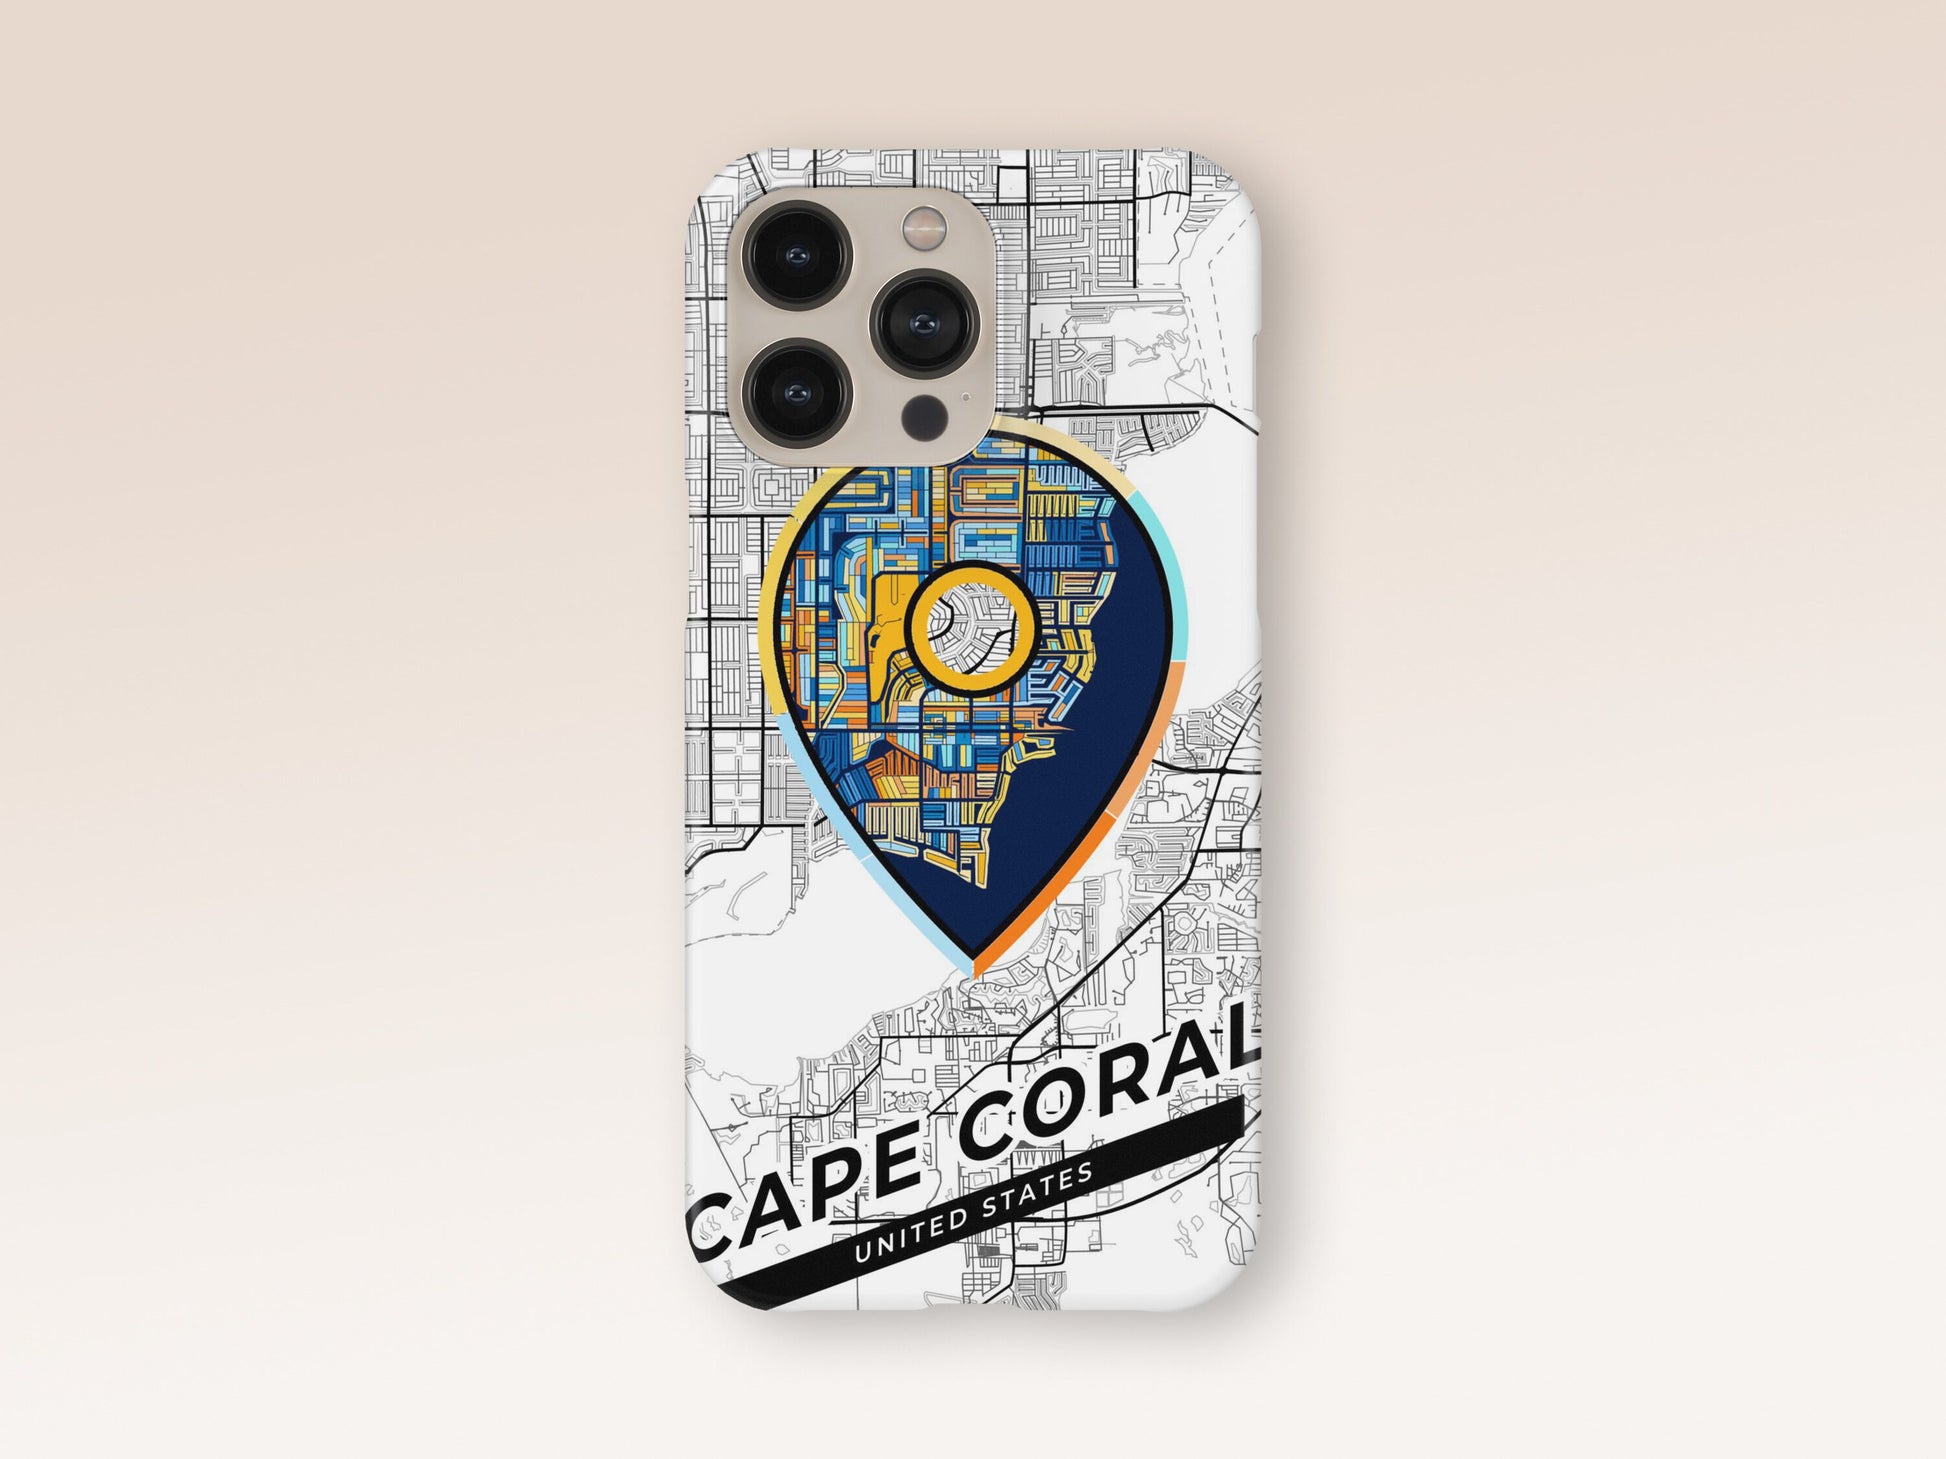 Cape Coral Florida slim phone case with colorful icon. Birthday, wedding or housewarming gift. Couple match cases. 1